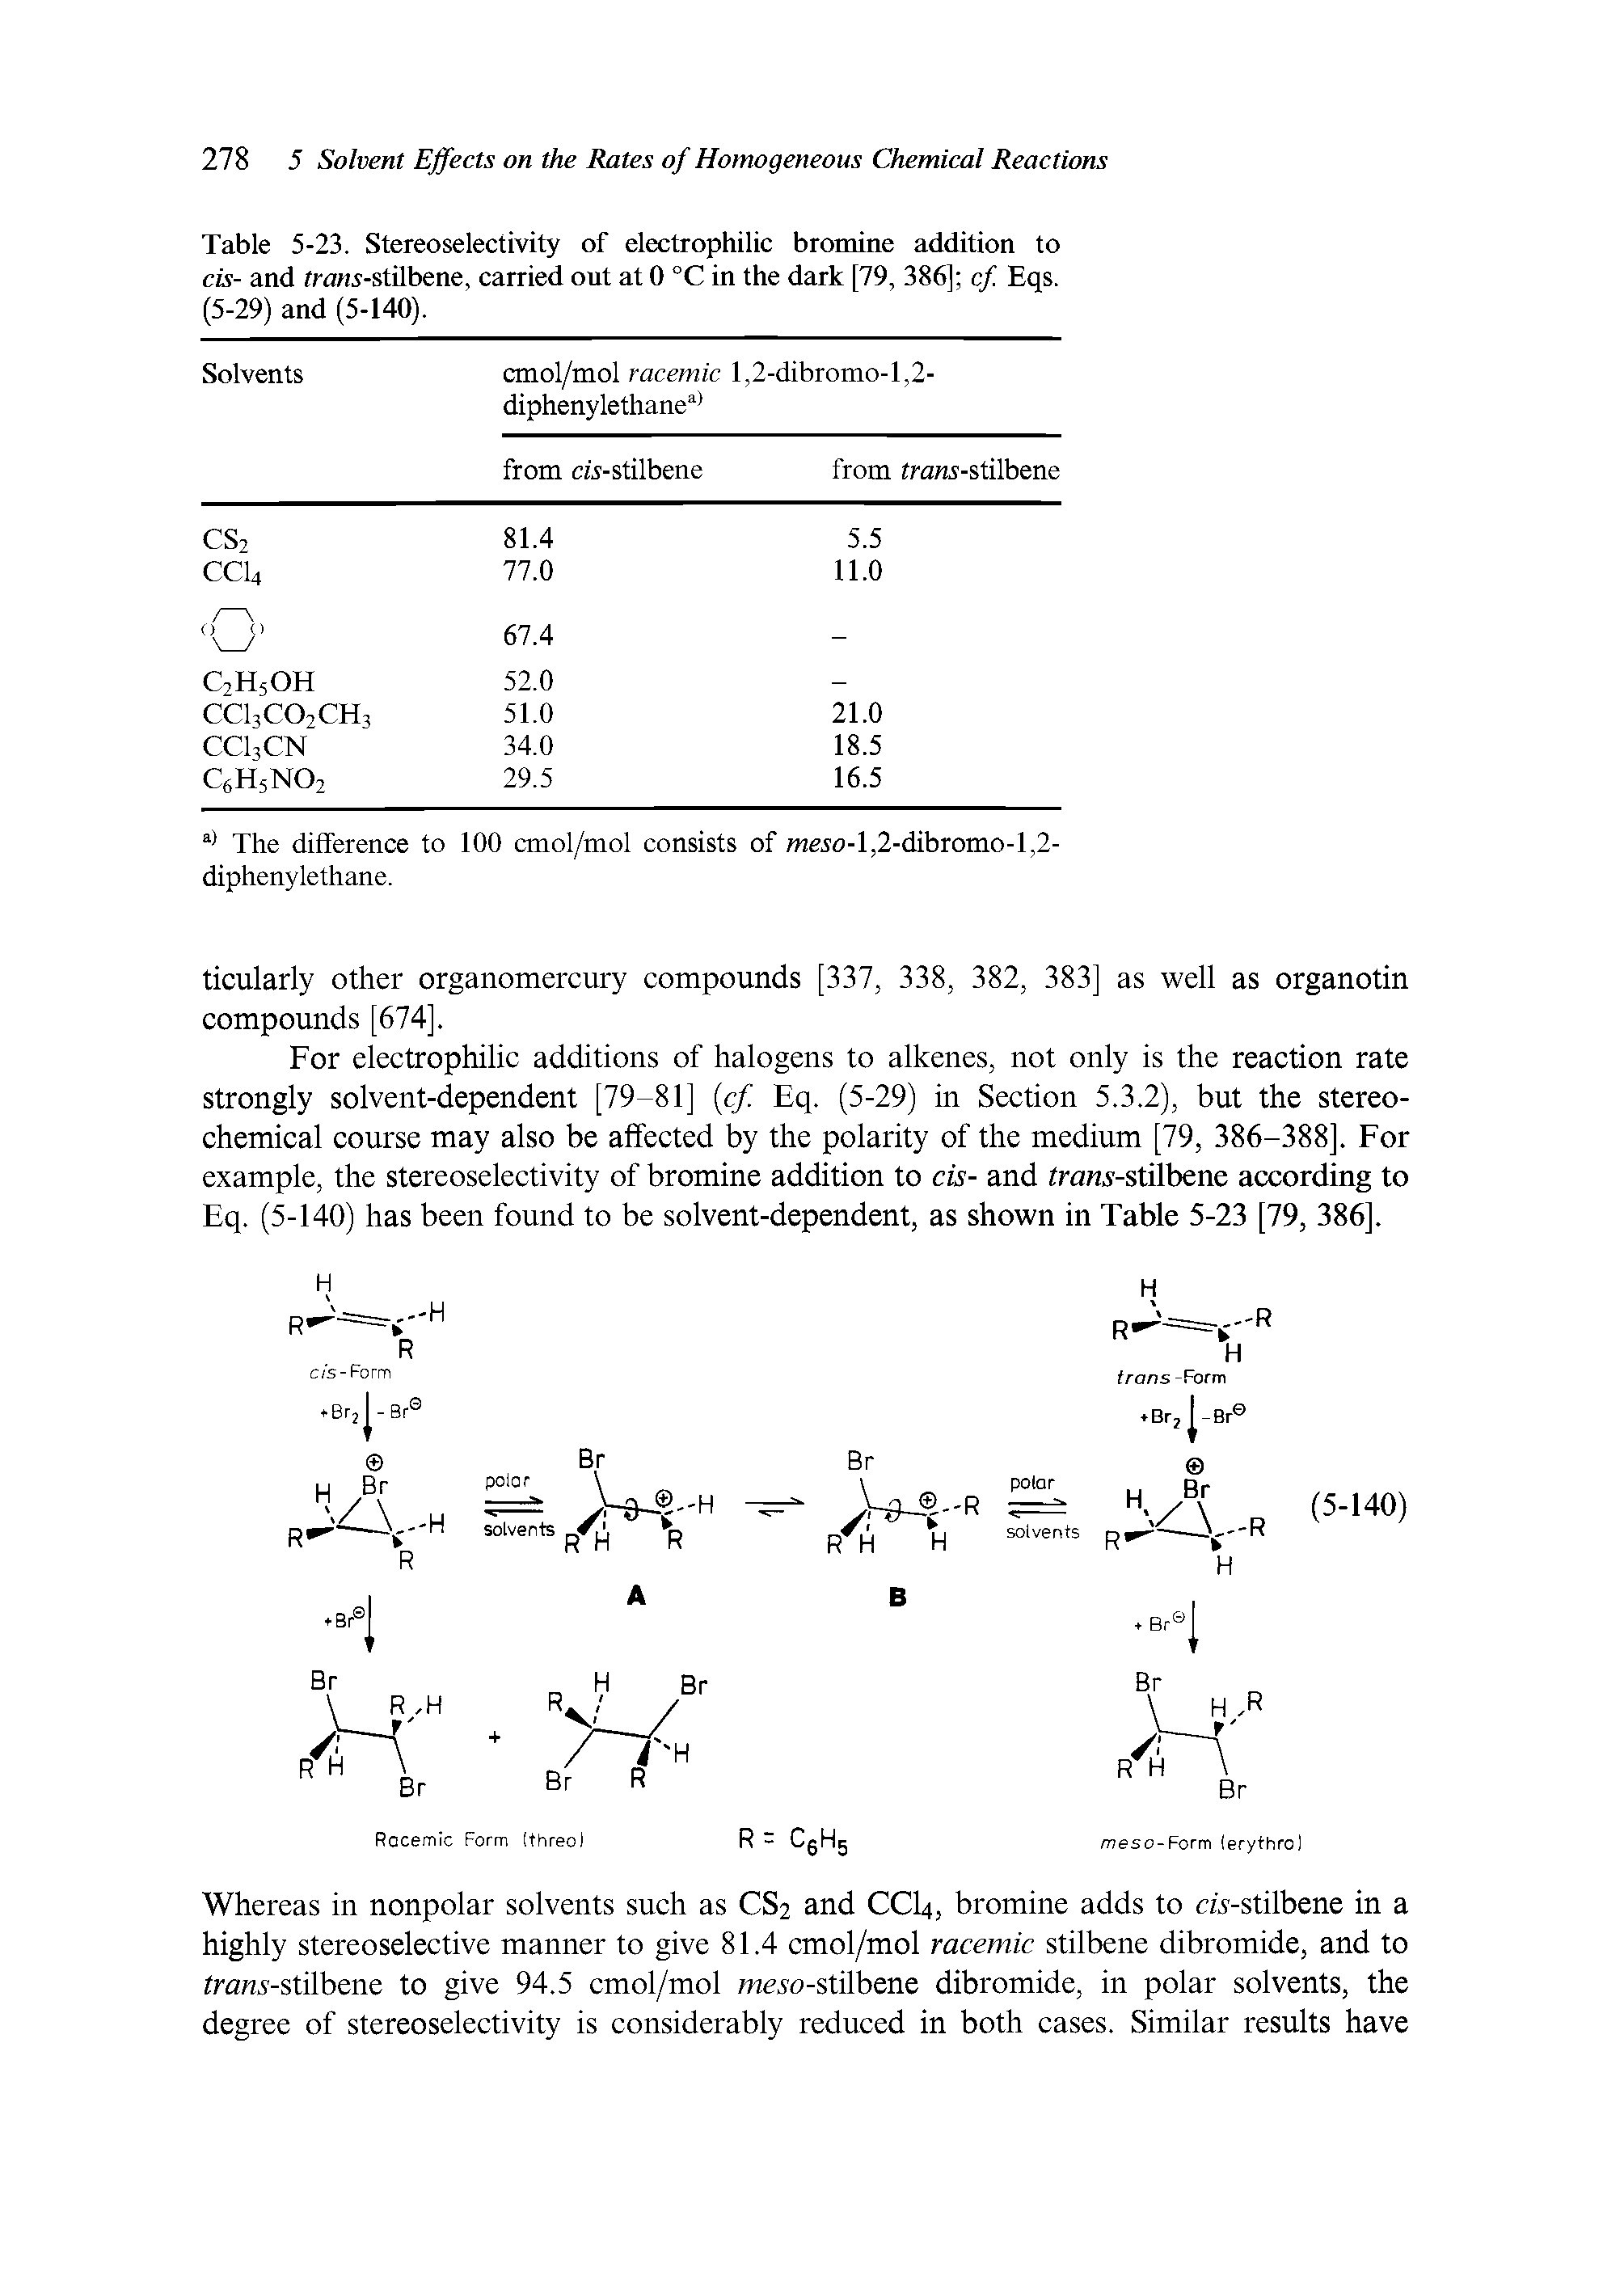 Table 5-23. Stereoselectivity of electrophilic bromine addition to cis- and tranr-stilbene, carried out at 0 °C in the dark [79, 386] cf. Eqs. (5-29) and (5-140).